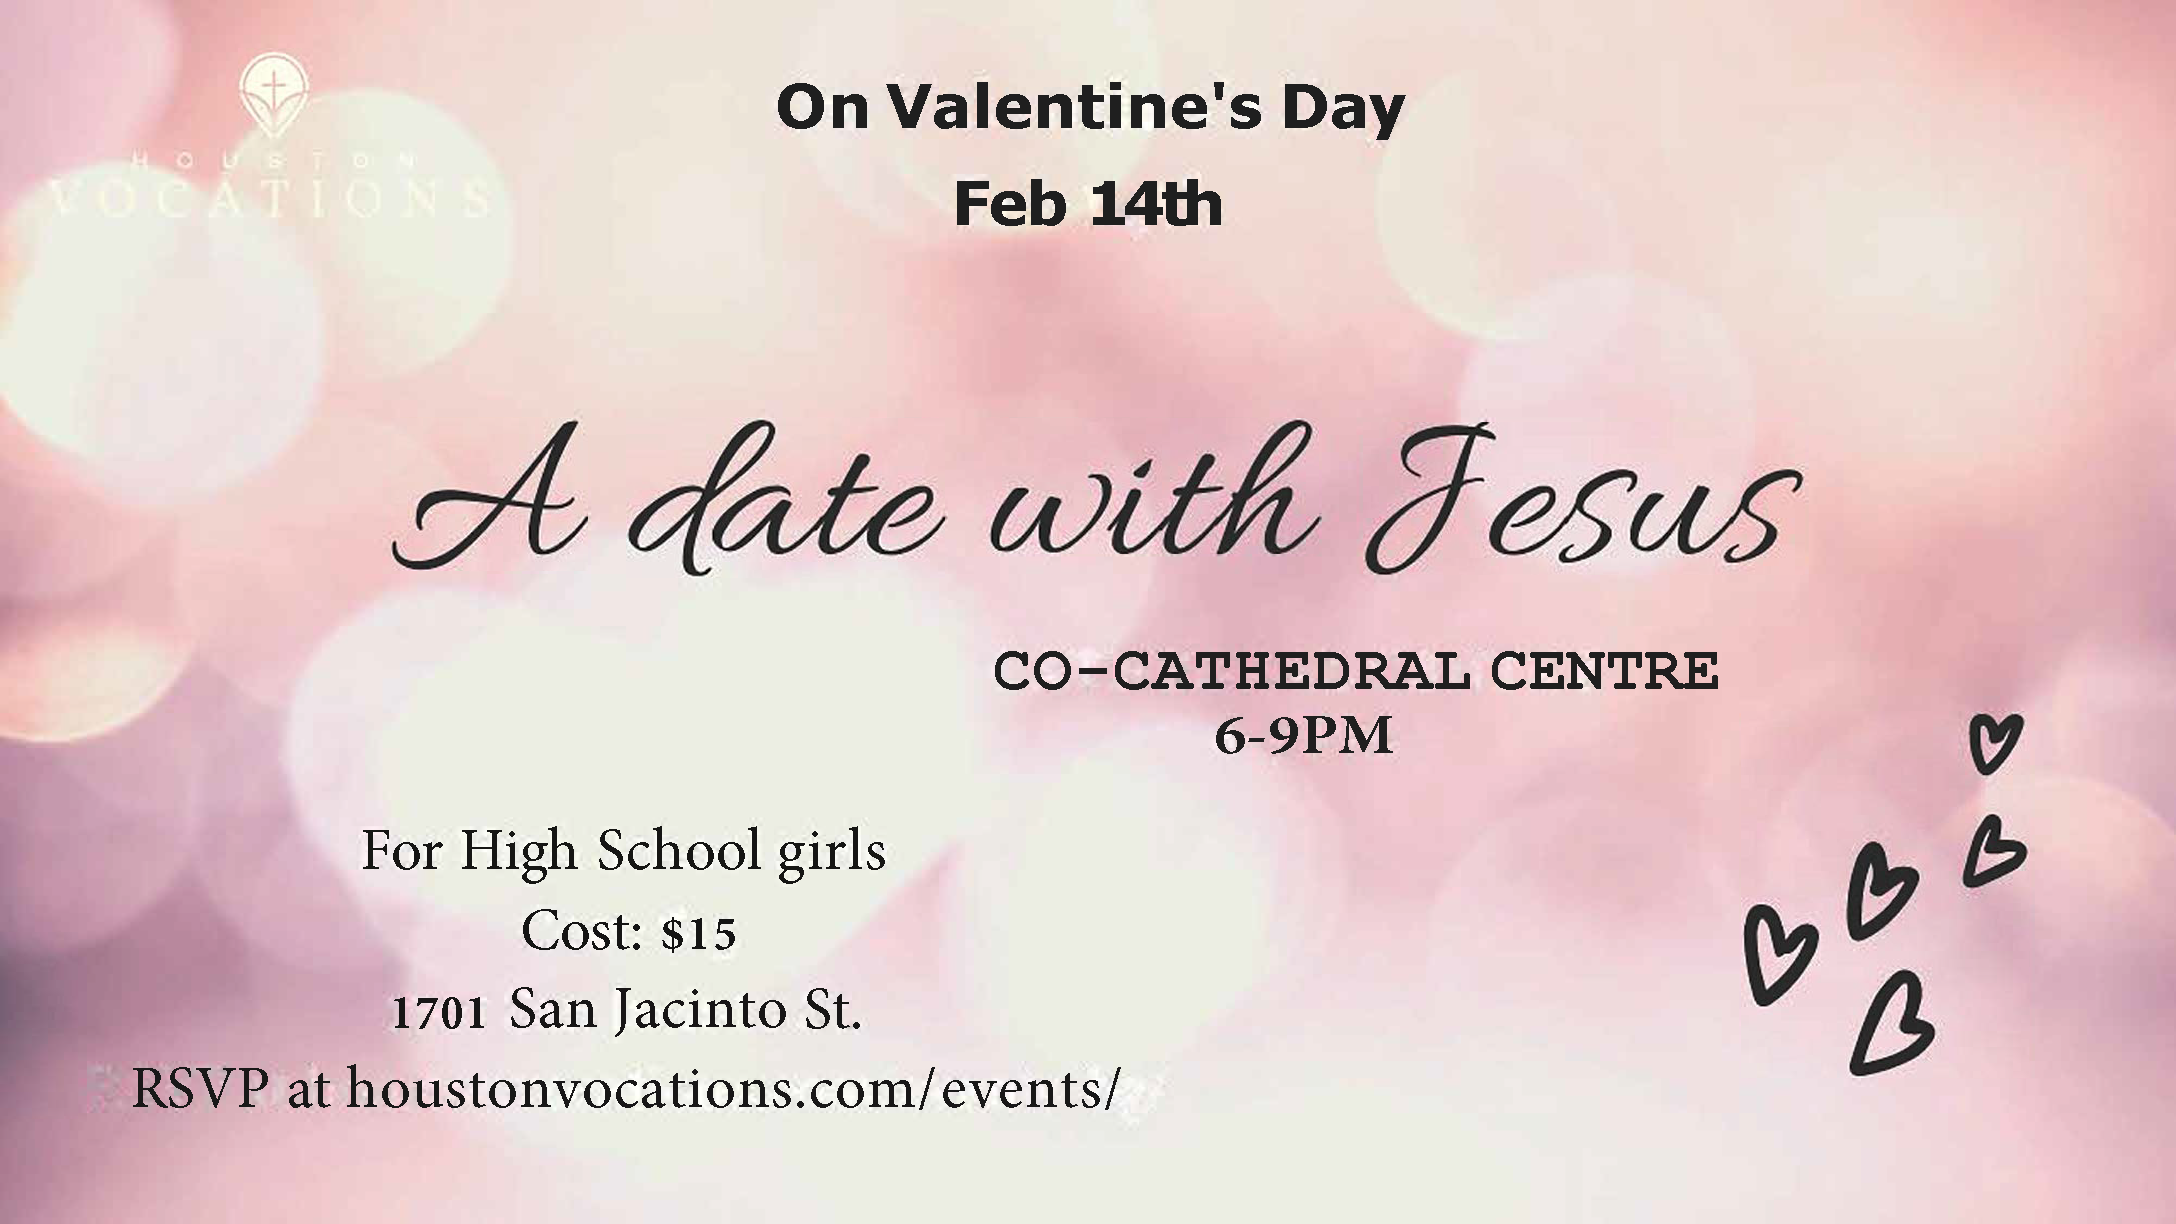 A date with Jesus